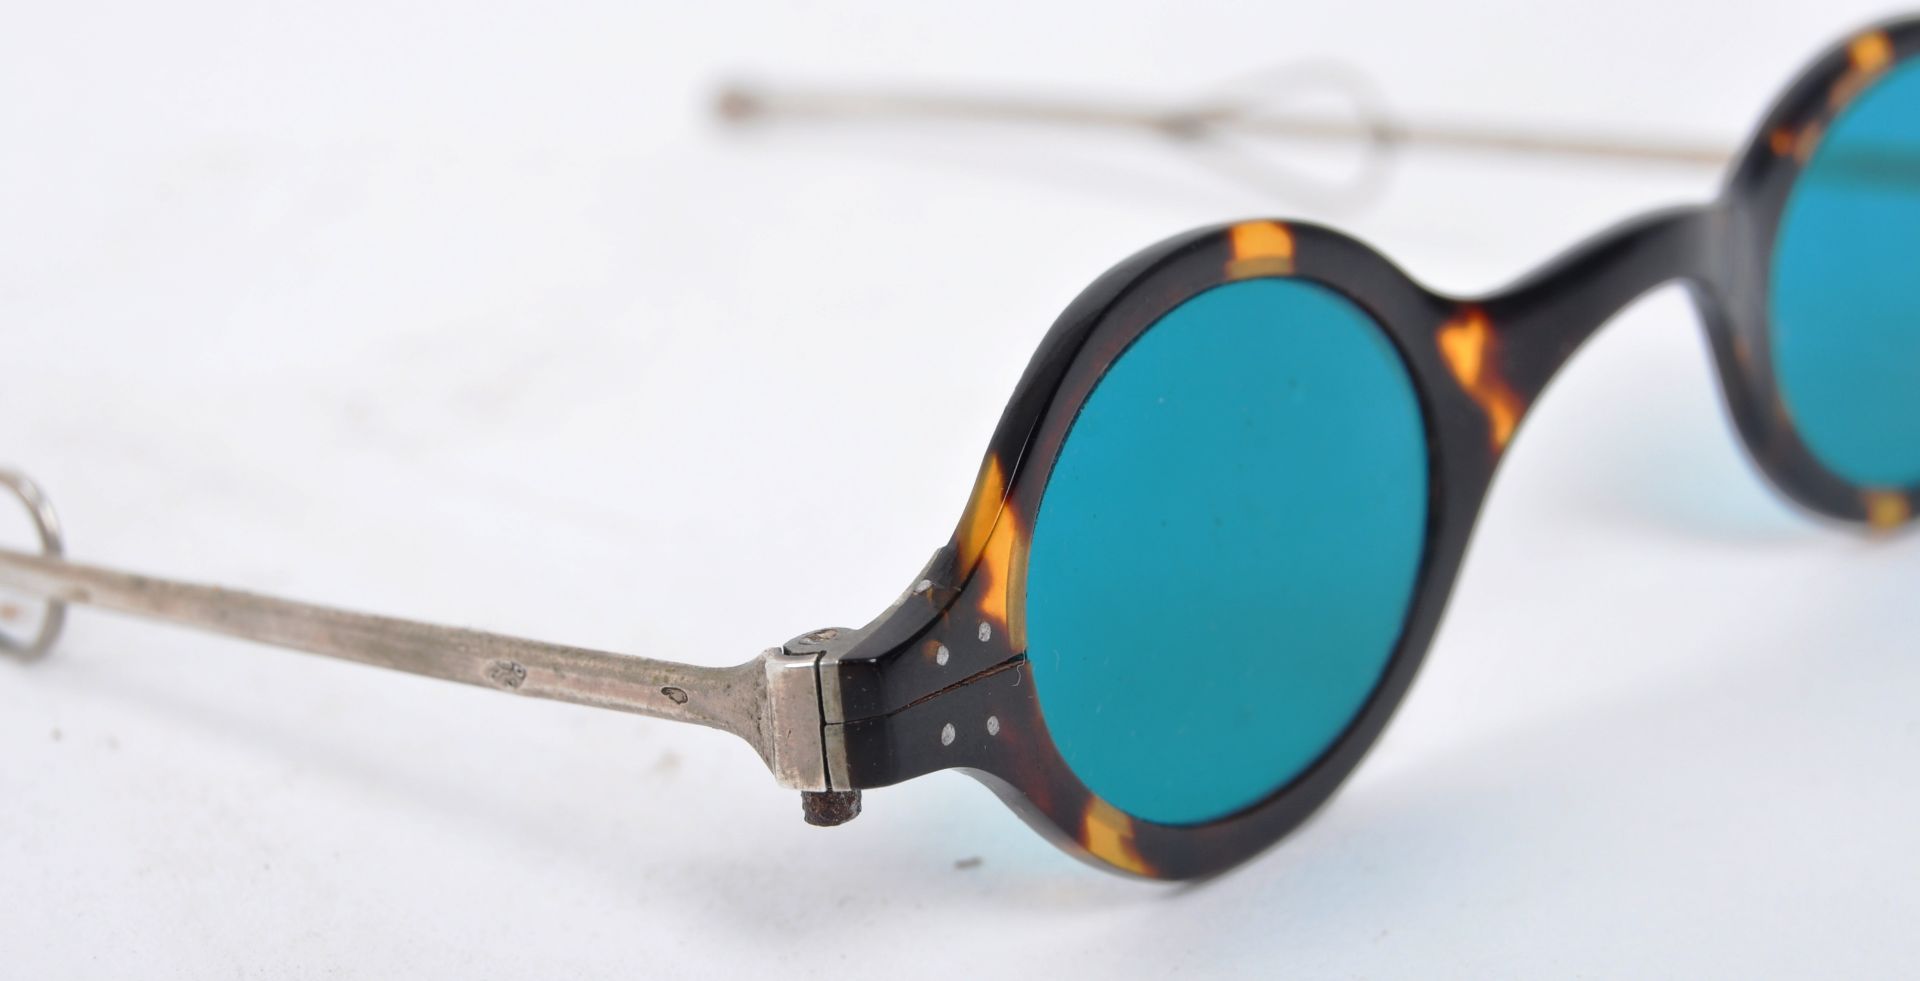 SHAGREEN CASED - BLUE GLASS 19TH CENTURY SPECTACLES - Image 5 of 8